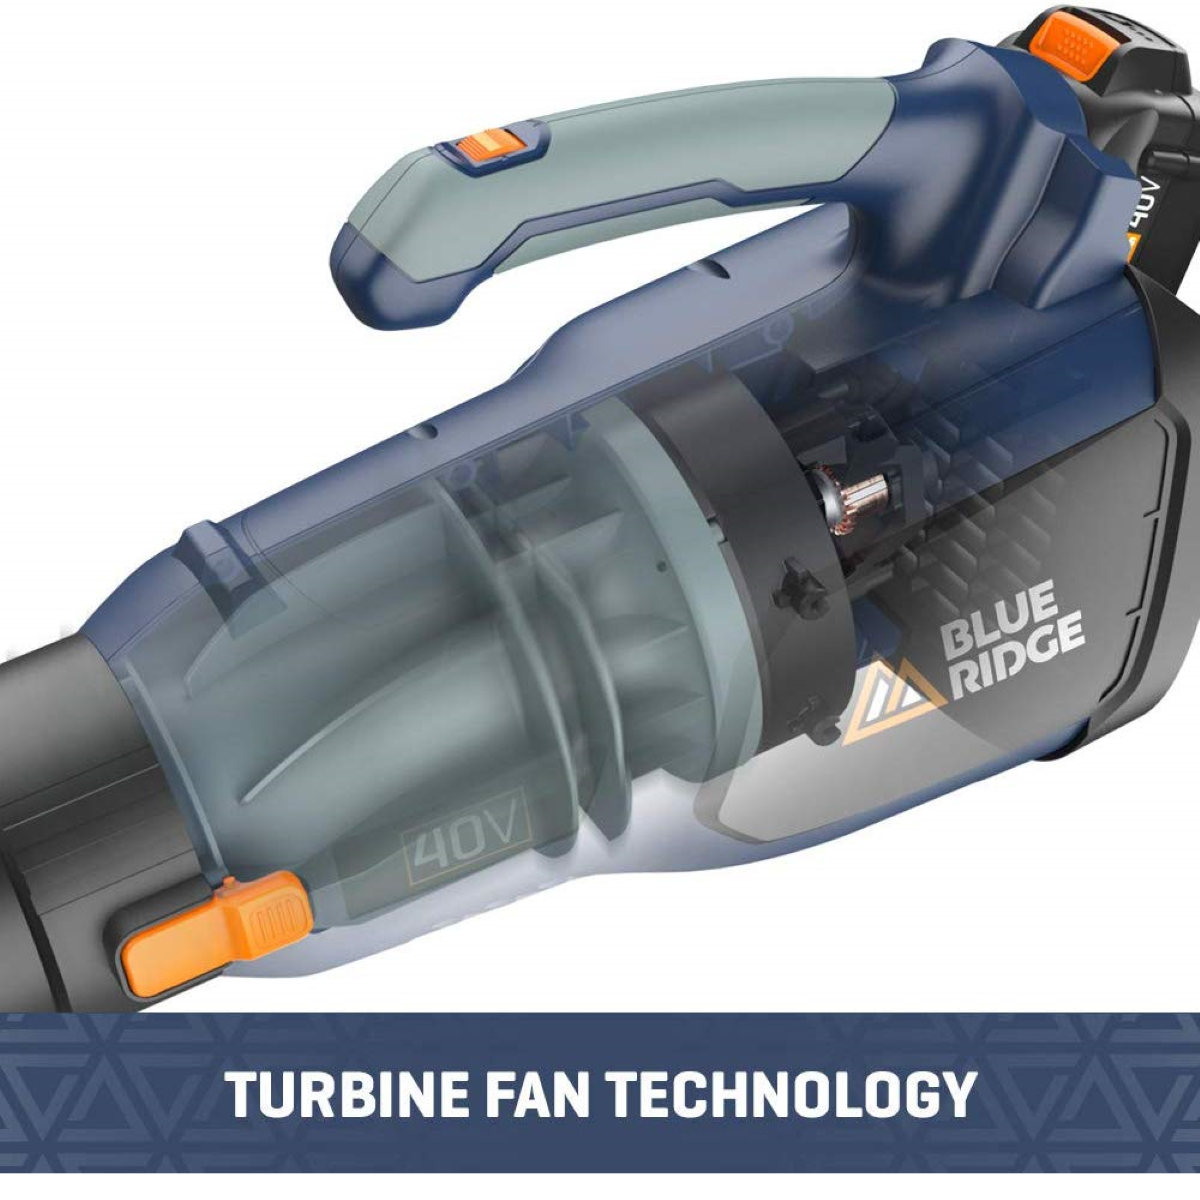 State-of-the-art turbine fan technology and adjustable speed controls